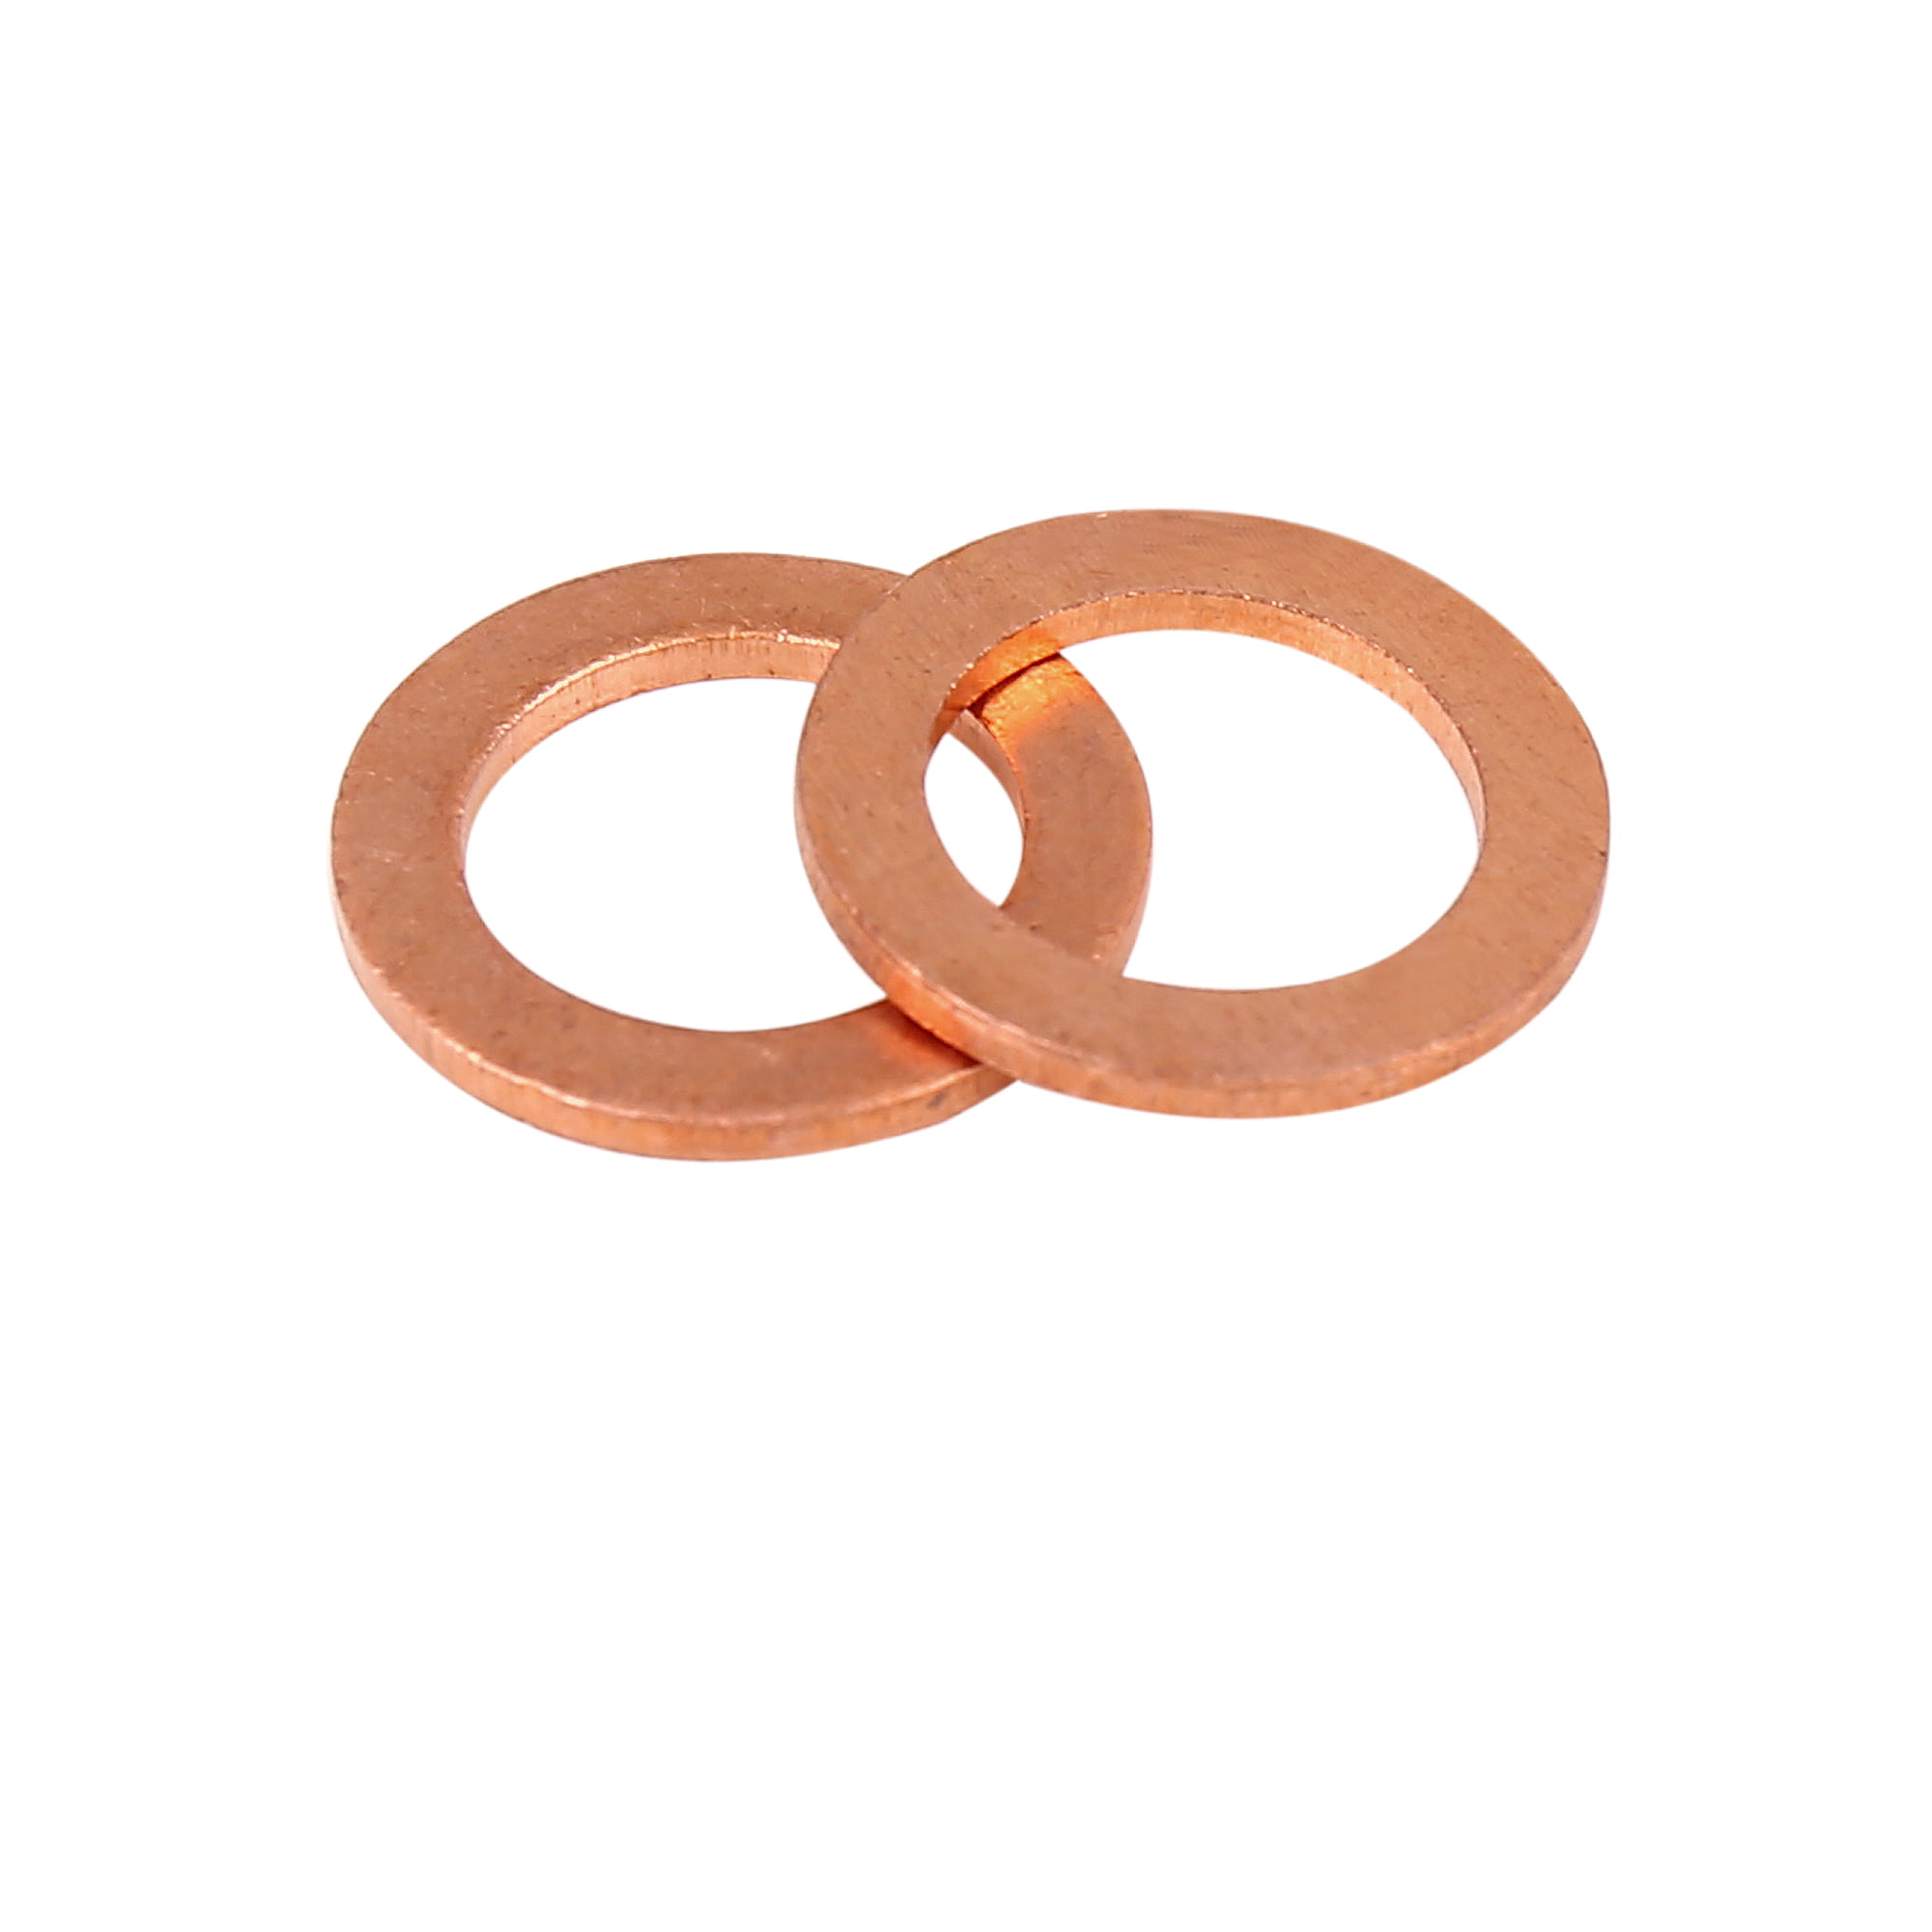 Details about  / 280Pcs Solid Copper Crush Washers Seal Flat Ring Hydraulic Fittings Set For Car